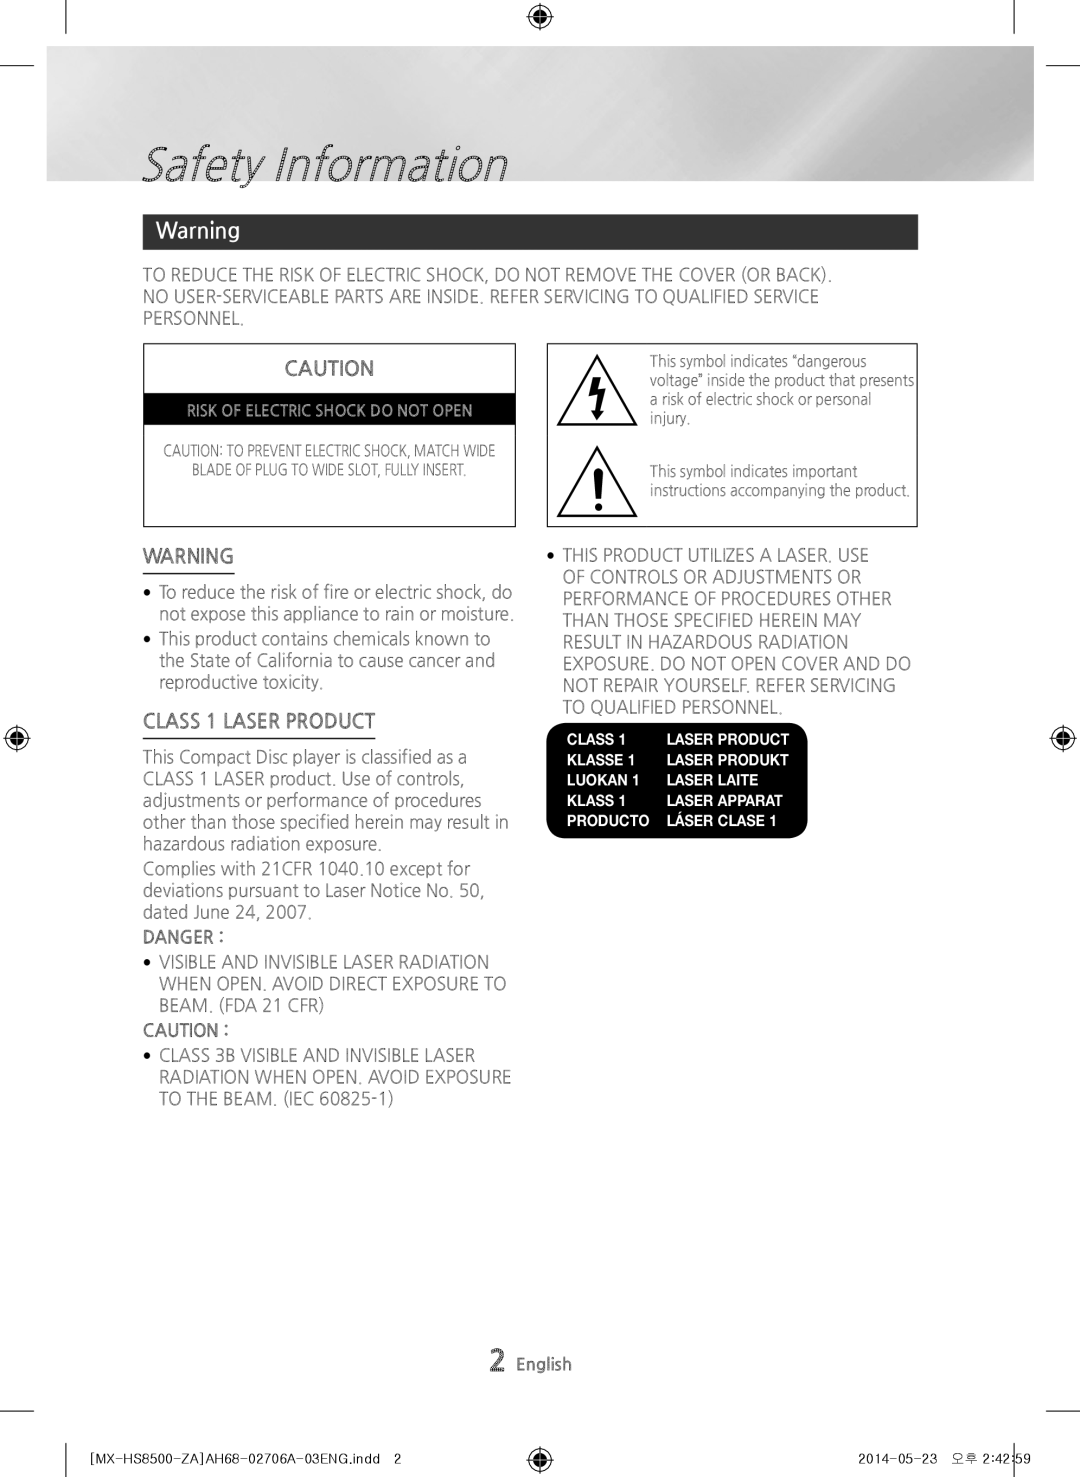 Samsung MX-HS8500 user manual Safety Information, CLASS 1 LASER PRODUCT, Danger 